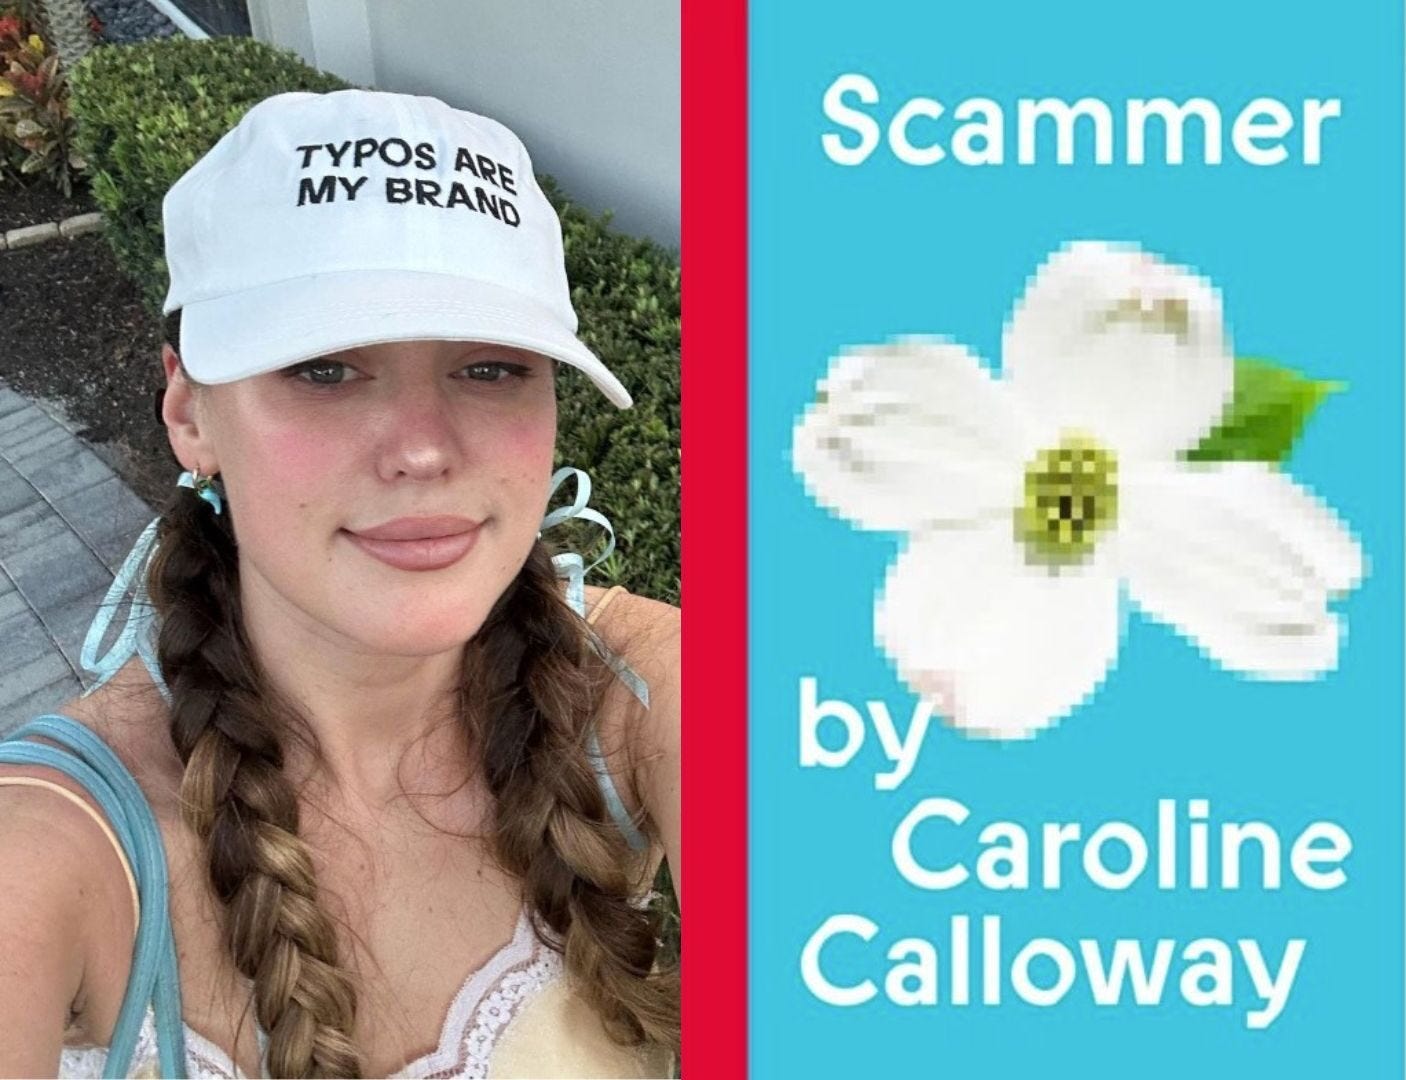 In the Shadow of Young Scammers in Flower: Caroline Calloway